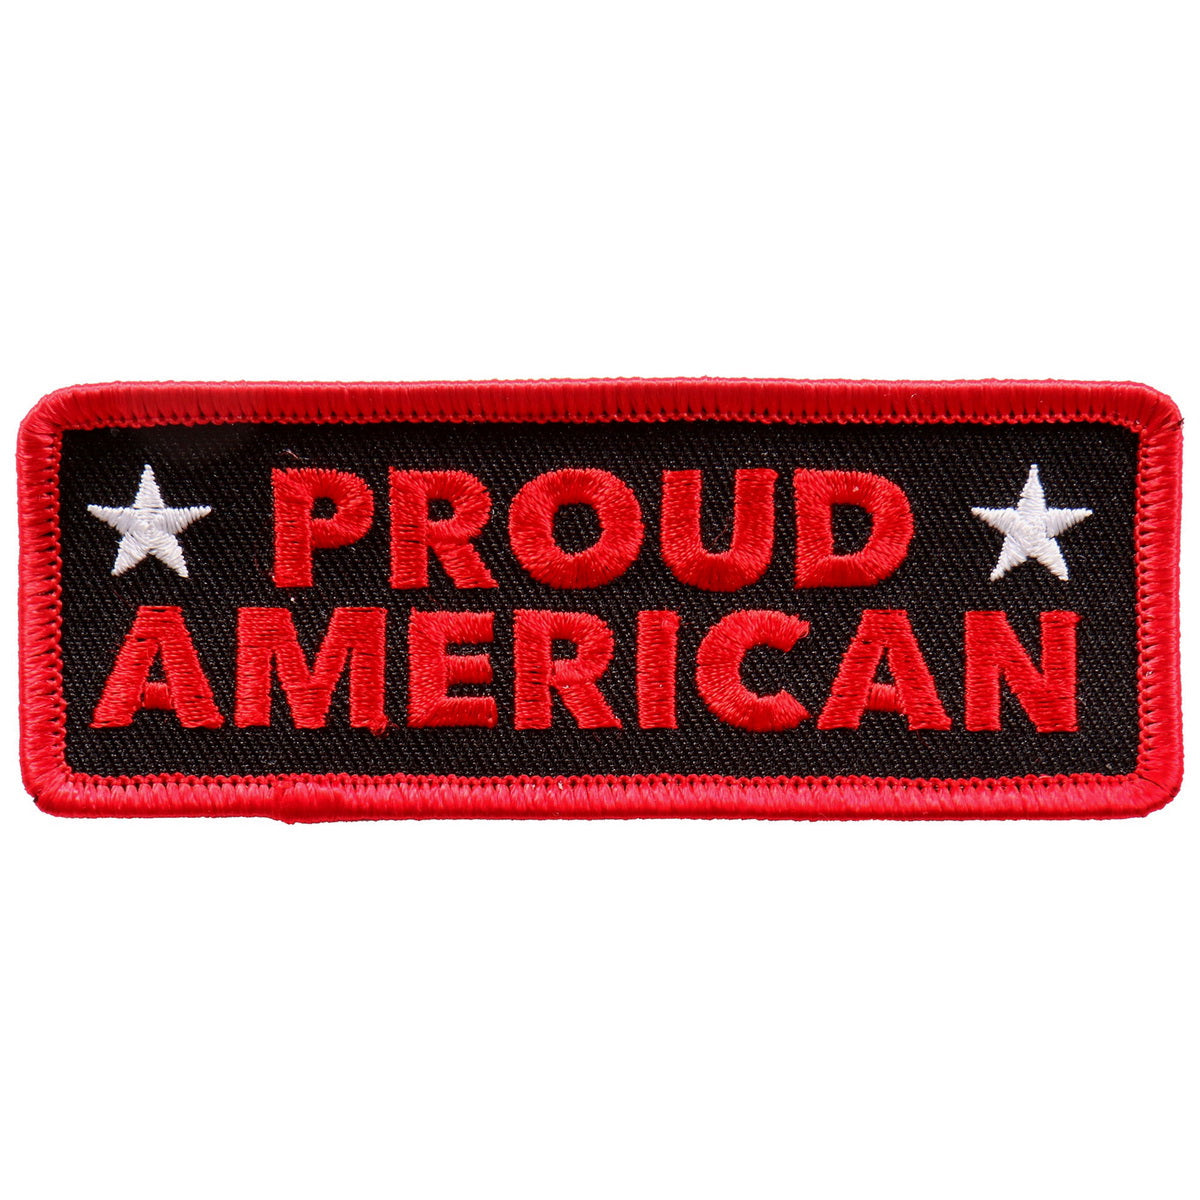 Hot Leathers PPL9692 Proud American 4"x2" Patch